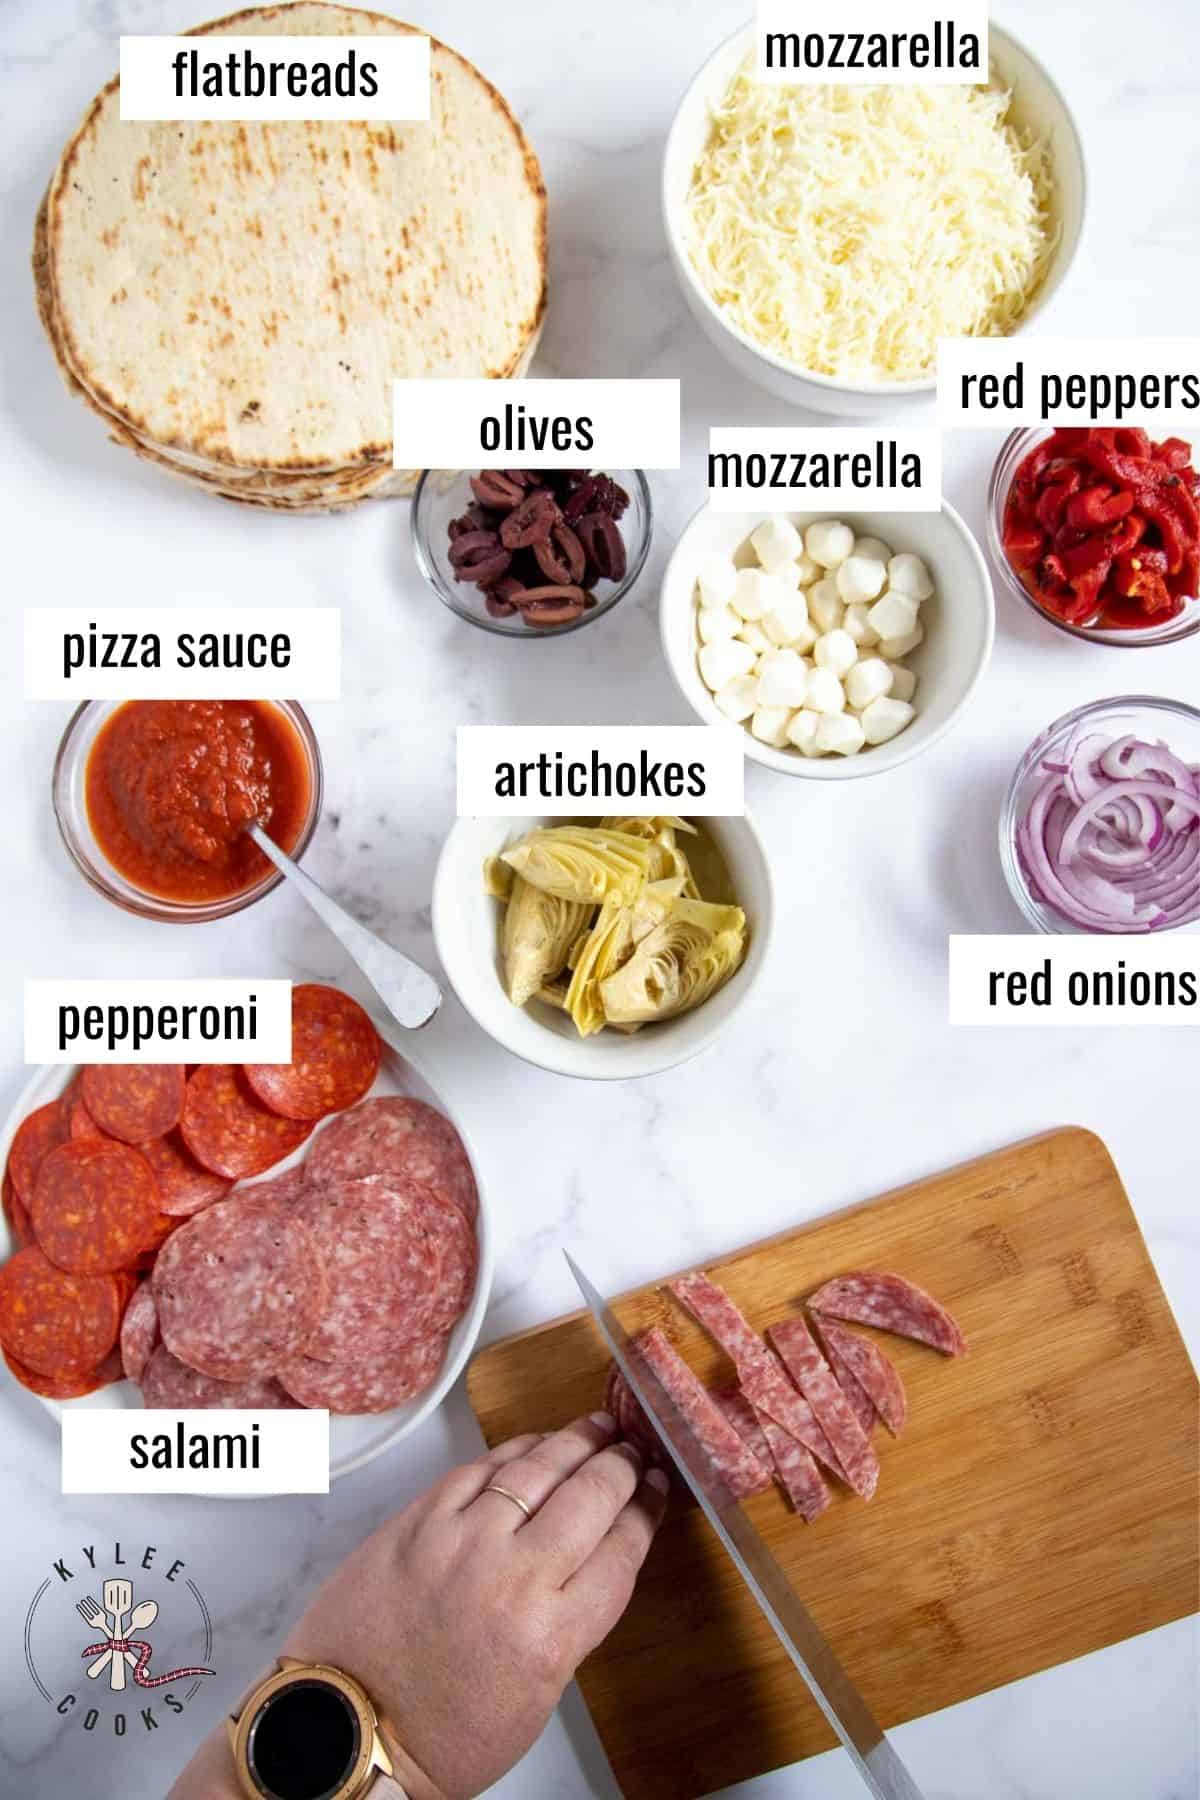 ingredients to make flatbread pizzas laid out and labeled